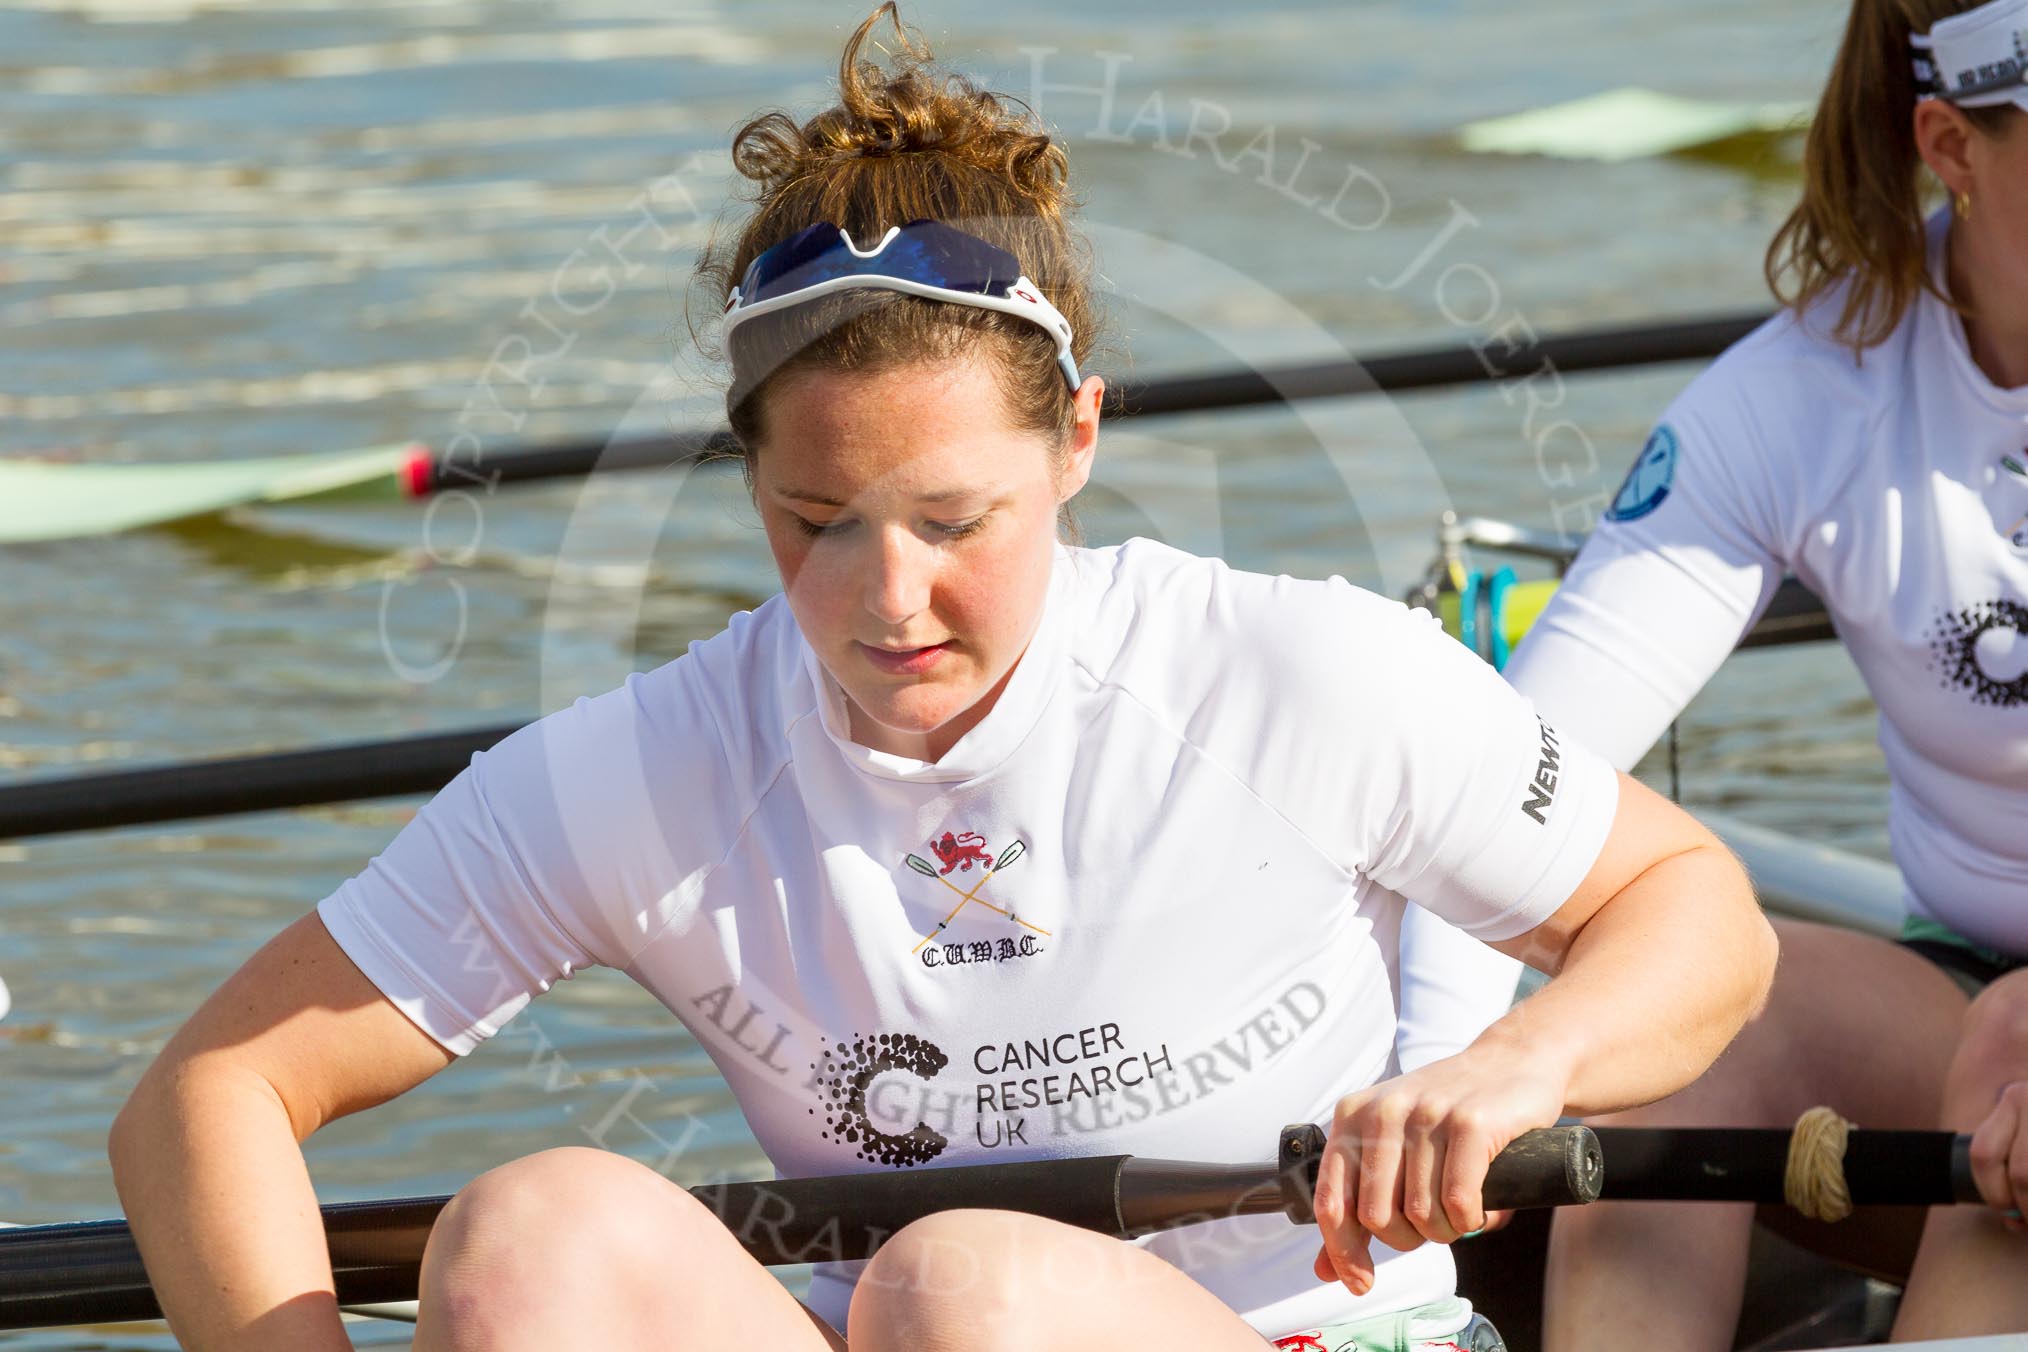 The Boat Race season 2017 -  The Cancer Research Women's Boat Race: CUWBC about to set off at Putney Embankment, here stroke Melissa Wilson.
River Thames between Putney Bridge and Mortlake,
London SW15,

United Kingdom,
on 02 April 2017 at 15:49, image #69